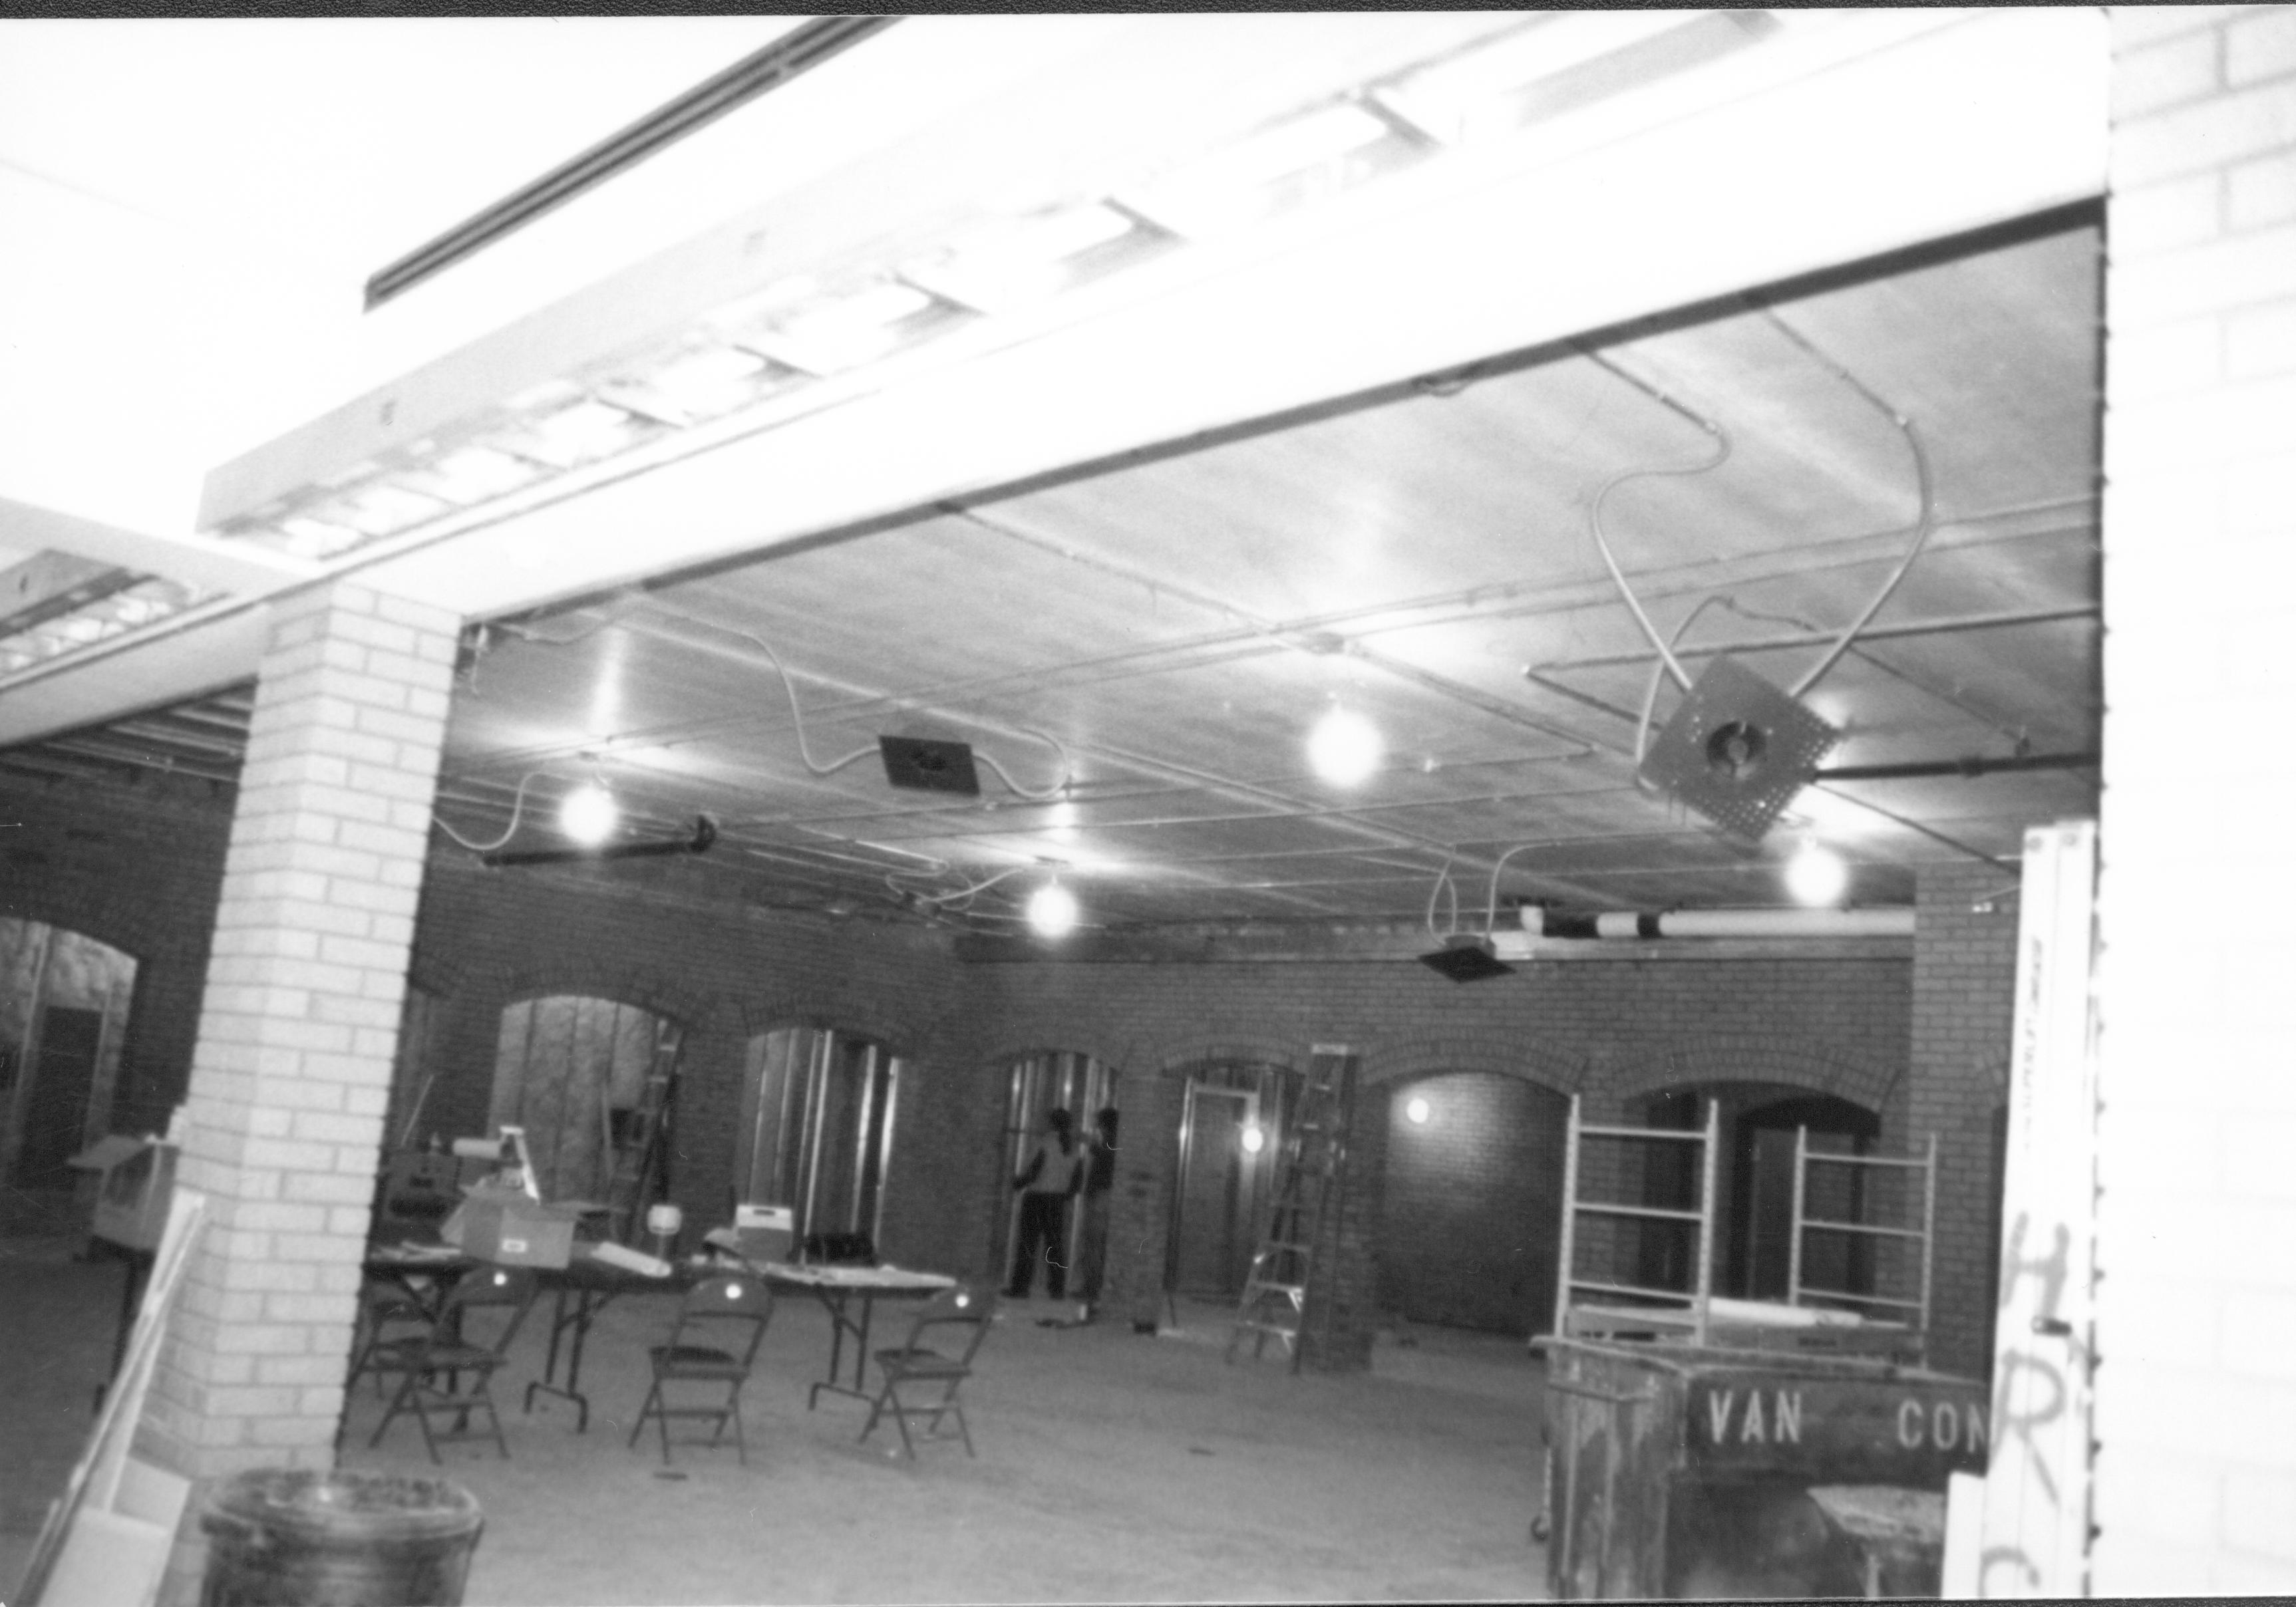 Visitor Center - remodeling, ceiling structure. Eastern National staff(?) checking storage area in background. Tables and chairs set up in main area. Restroom arches in background left. Door to office in background right. Looking North from South entrance area. Visitor Center, remodeling, bookstore, Eastern National, main, restrooms, office